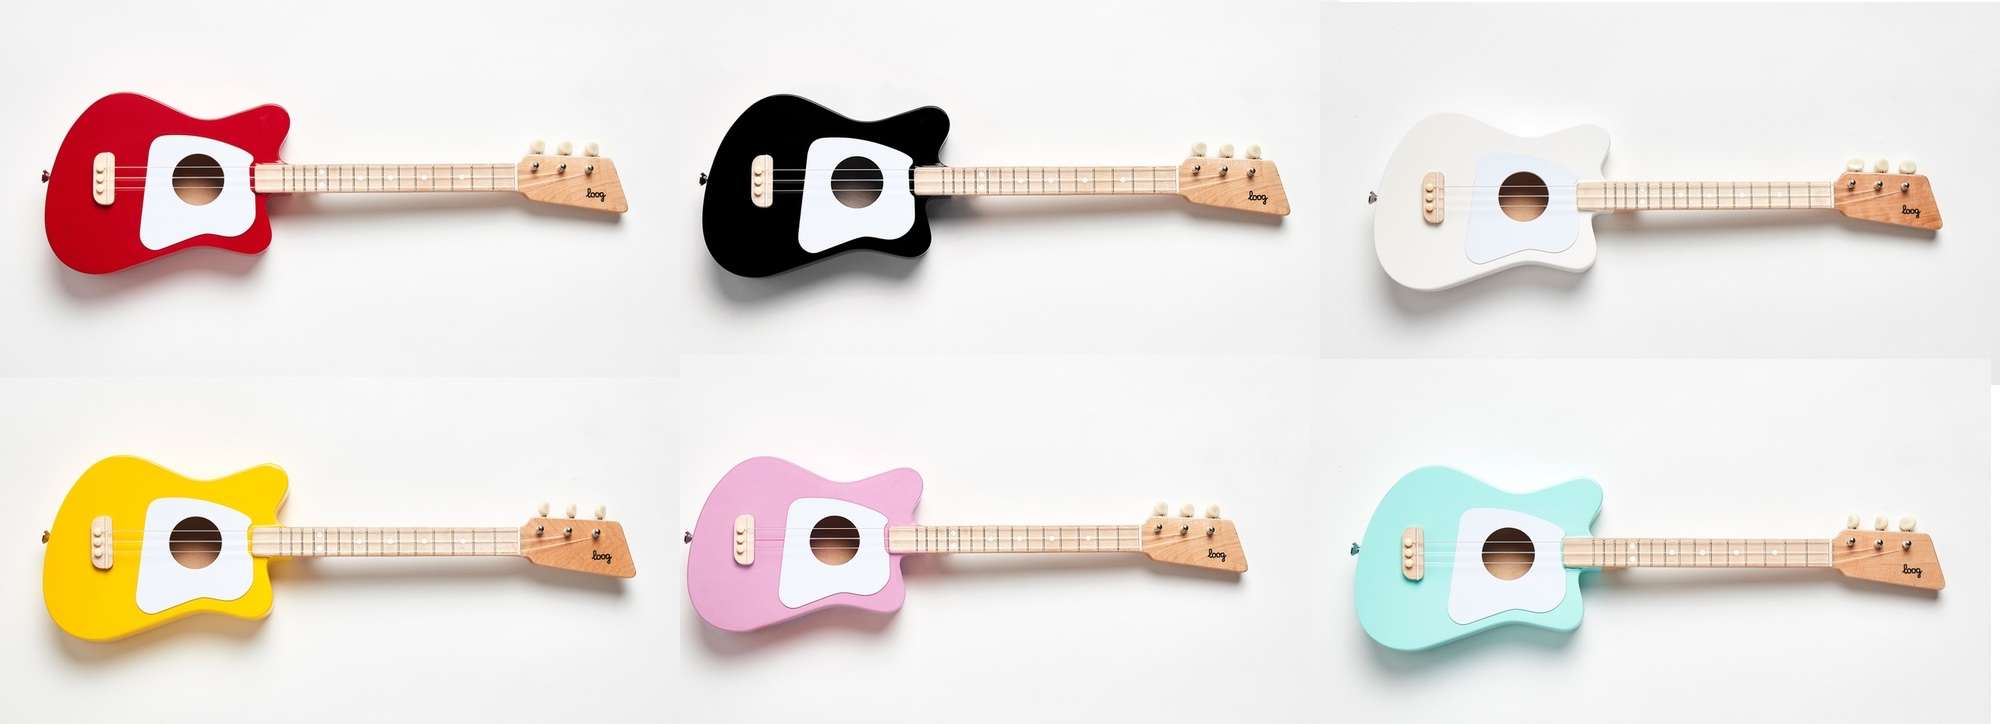 The mini is just about tthe cutest guitar ever made.